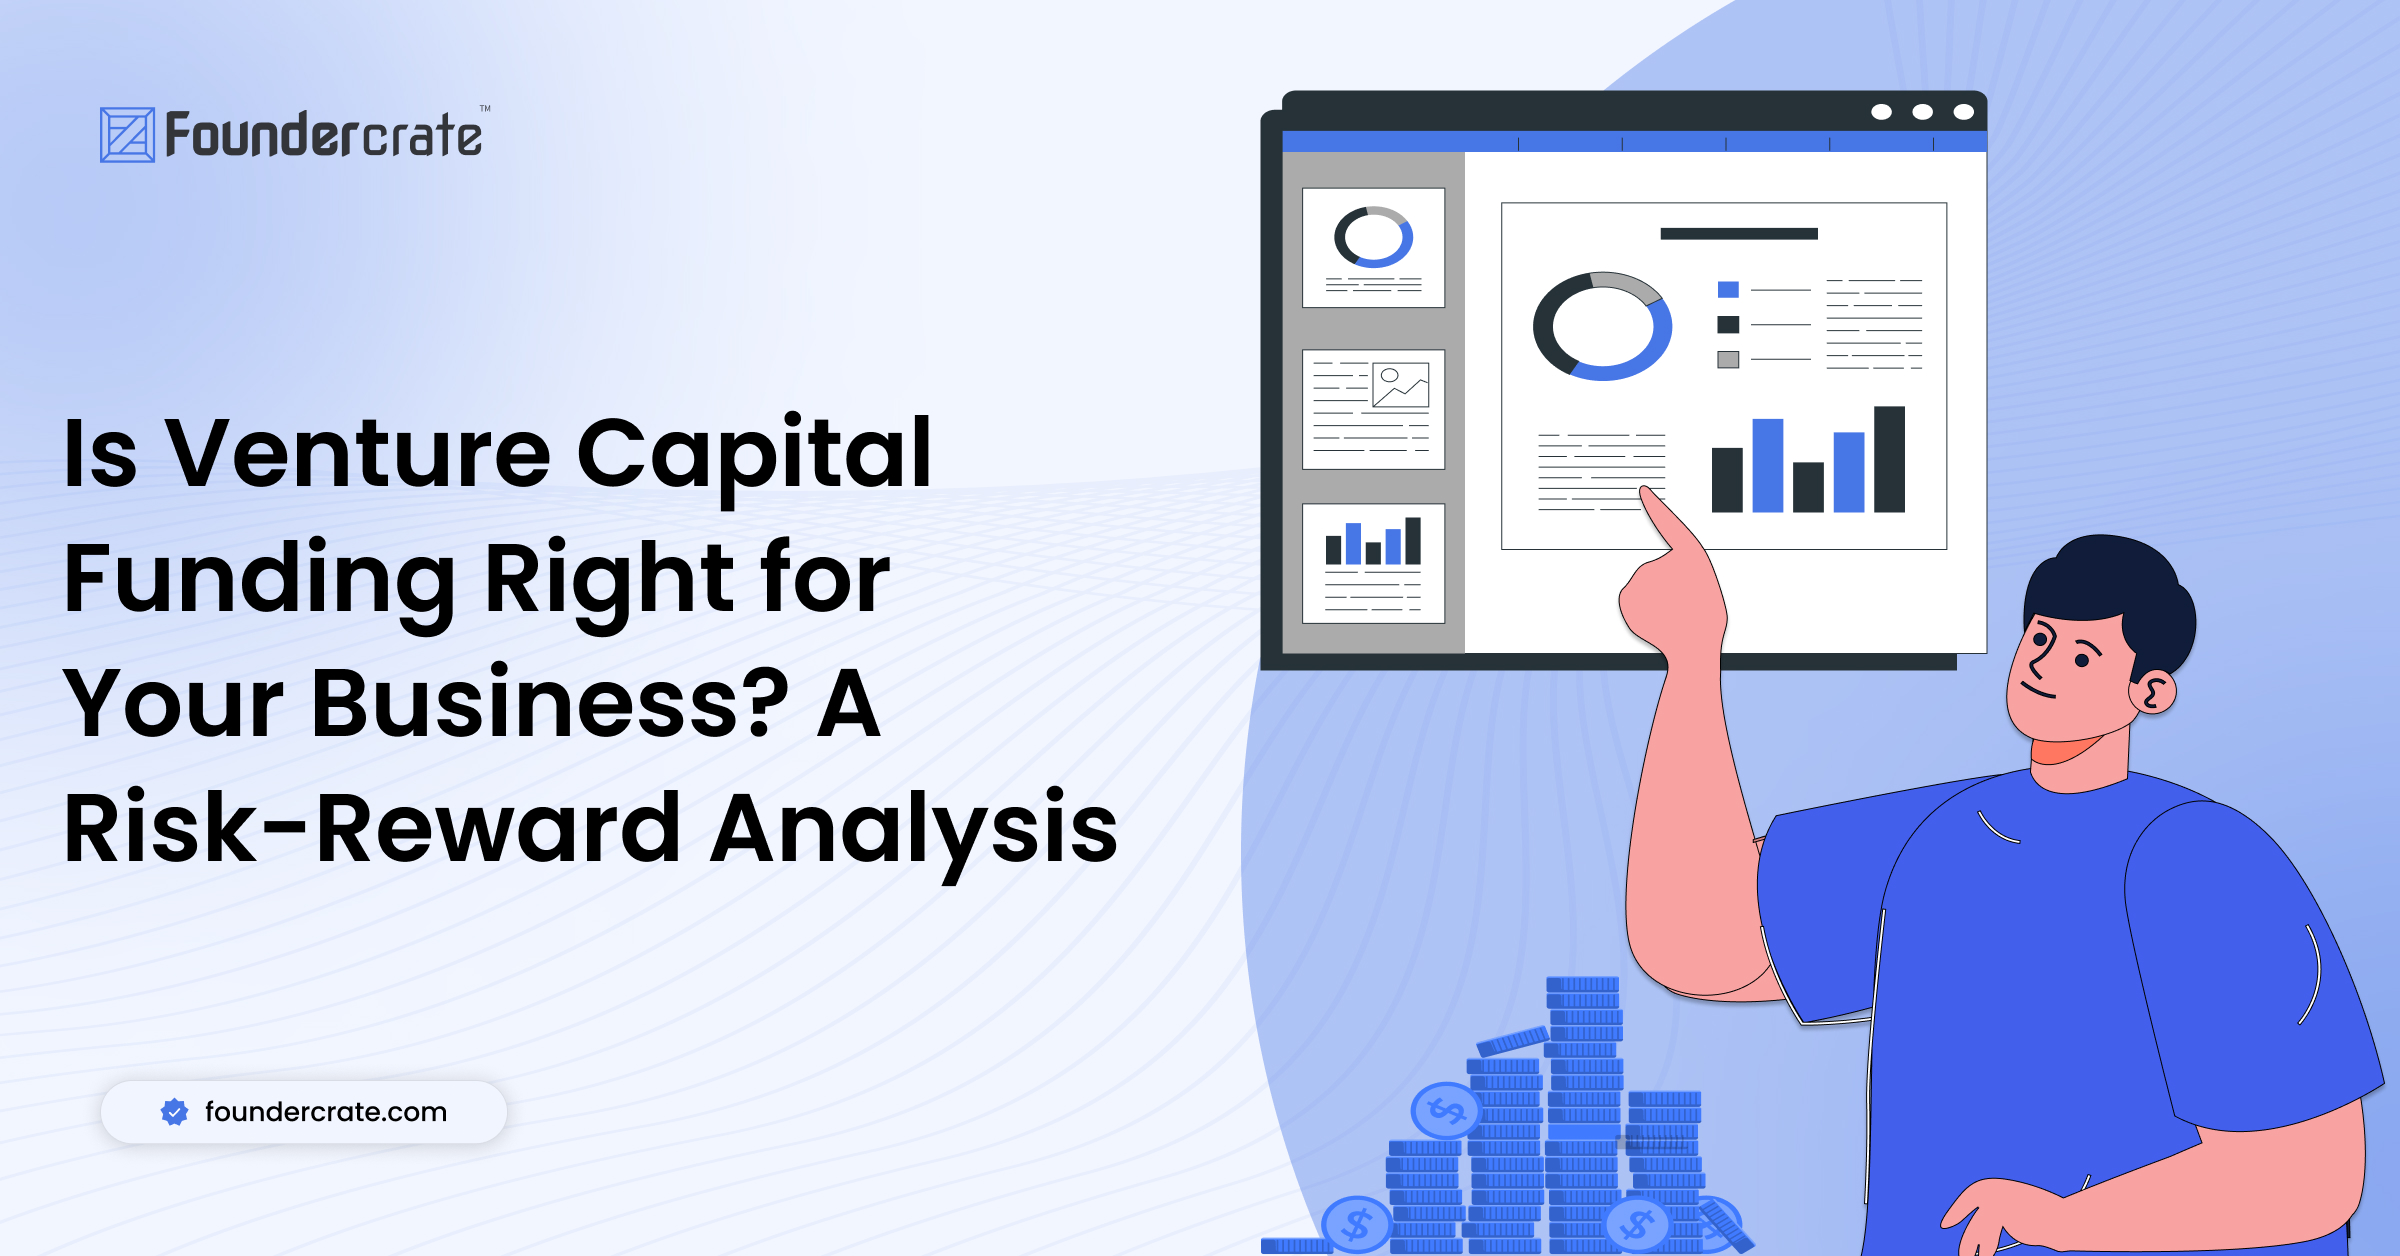 Is Venture Capital Funding Right for Your Business? A Risk-Reward Analysis